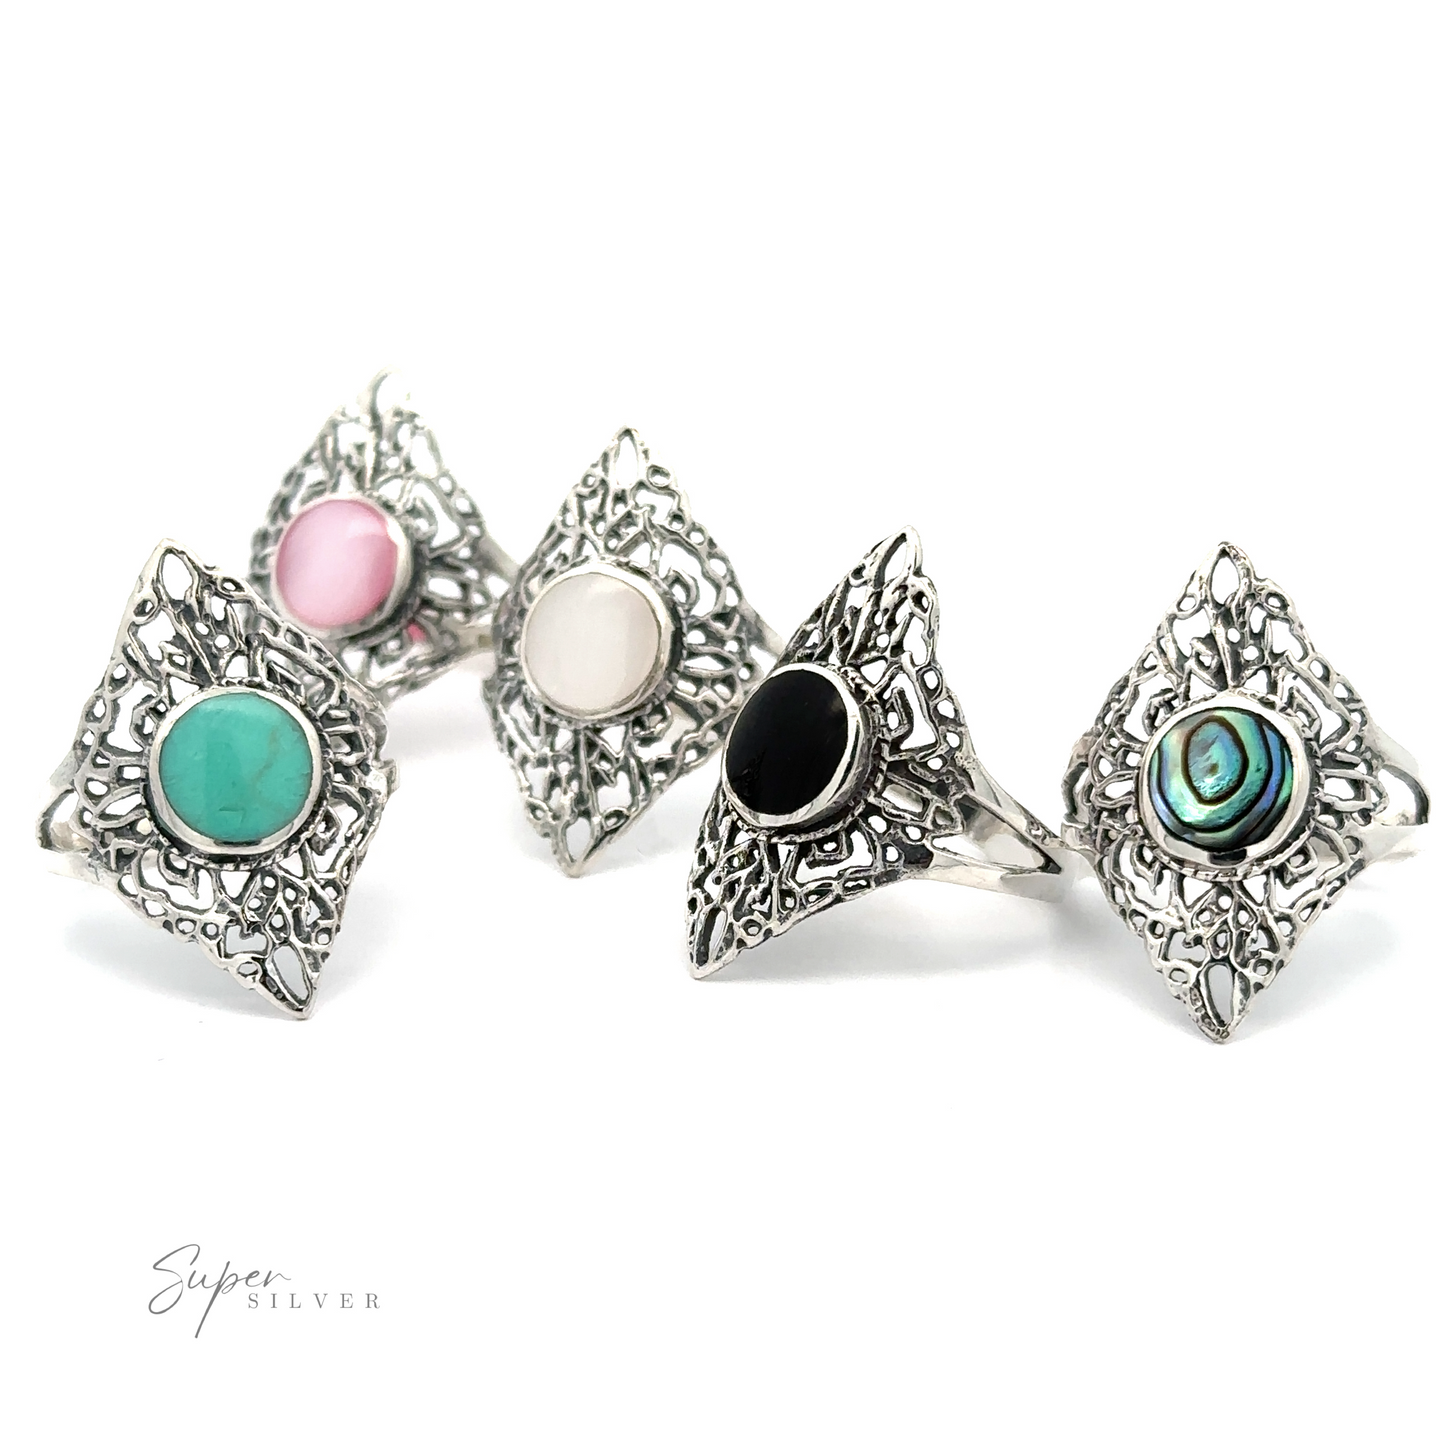 A selection of Diamond Shaped Filigree Rings With Round Inlaid Stones in various hues.